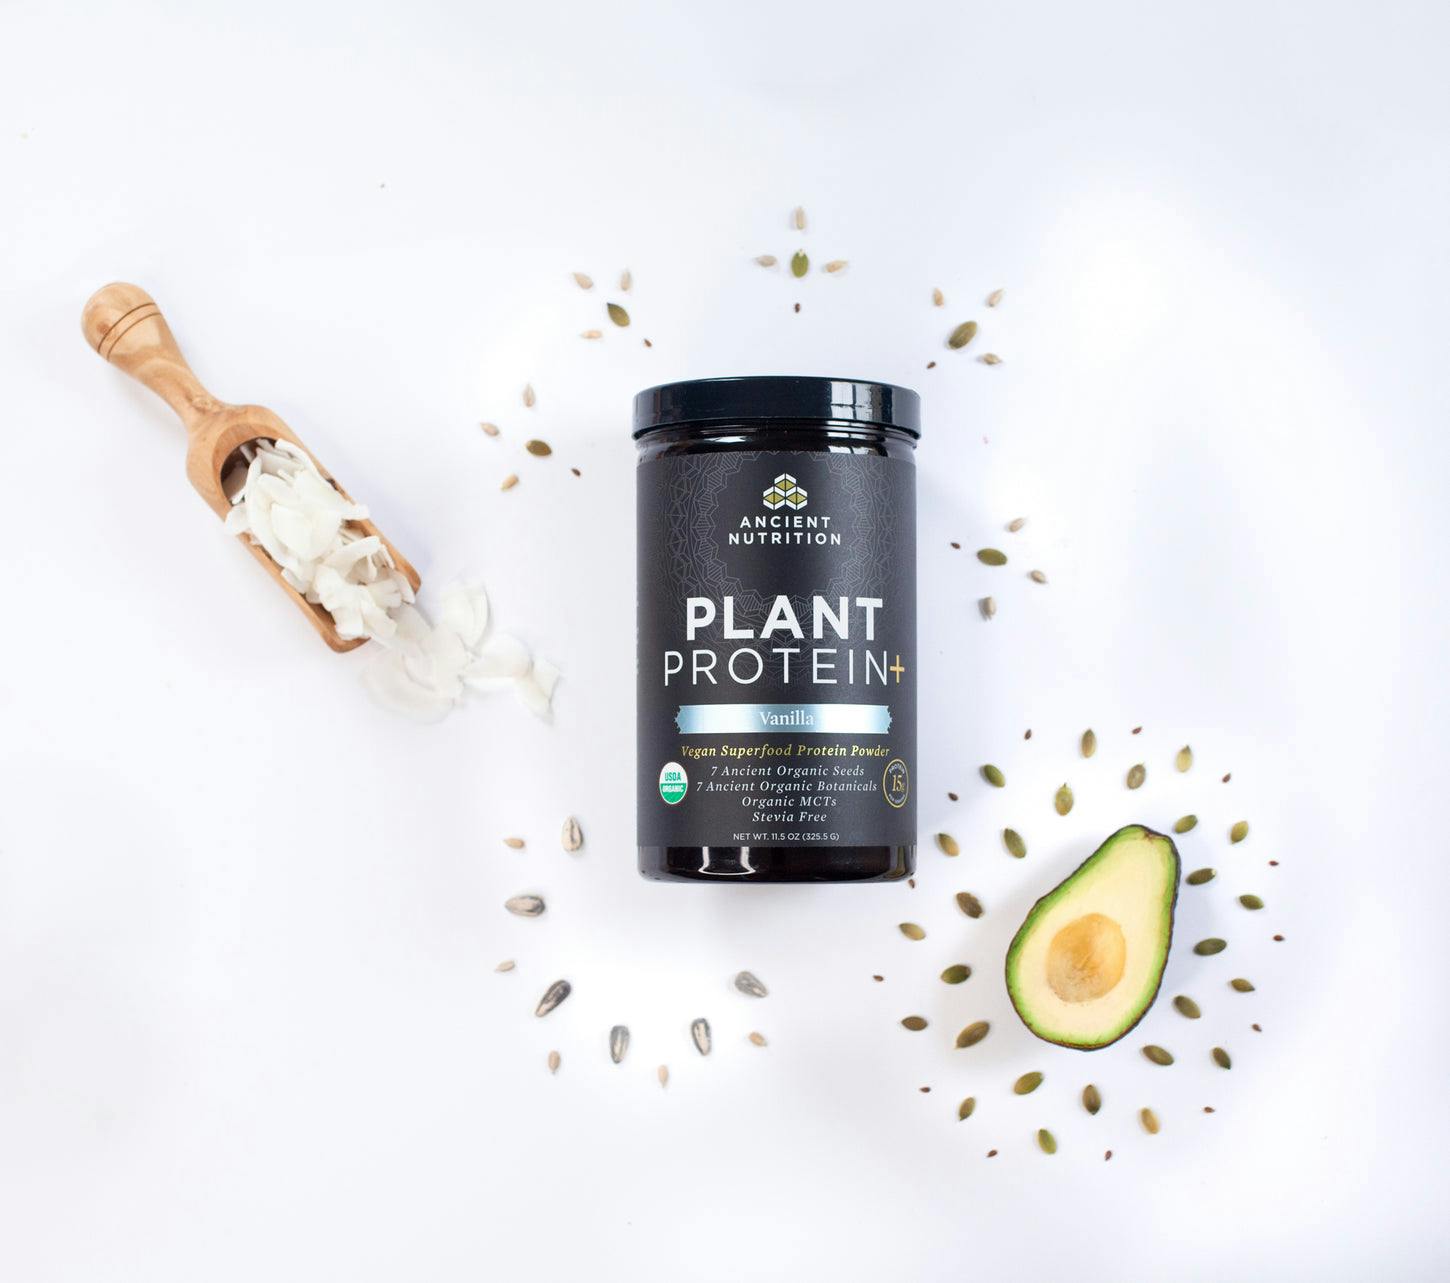 Plant Protein Vanilla next to an avocado and seeds